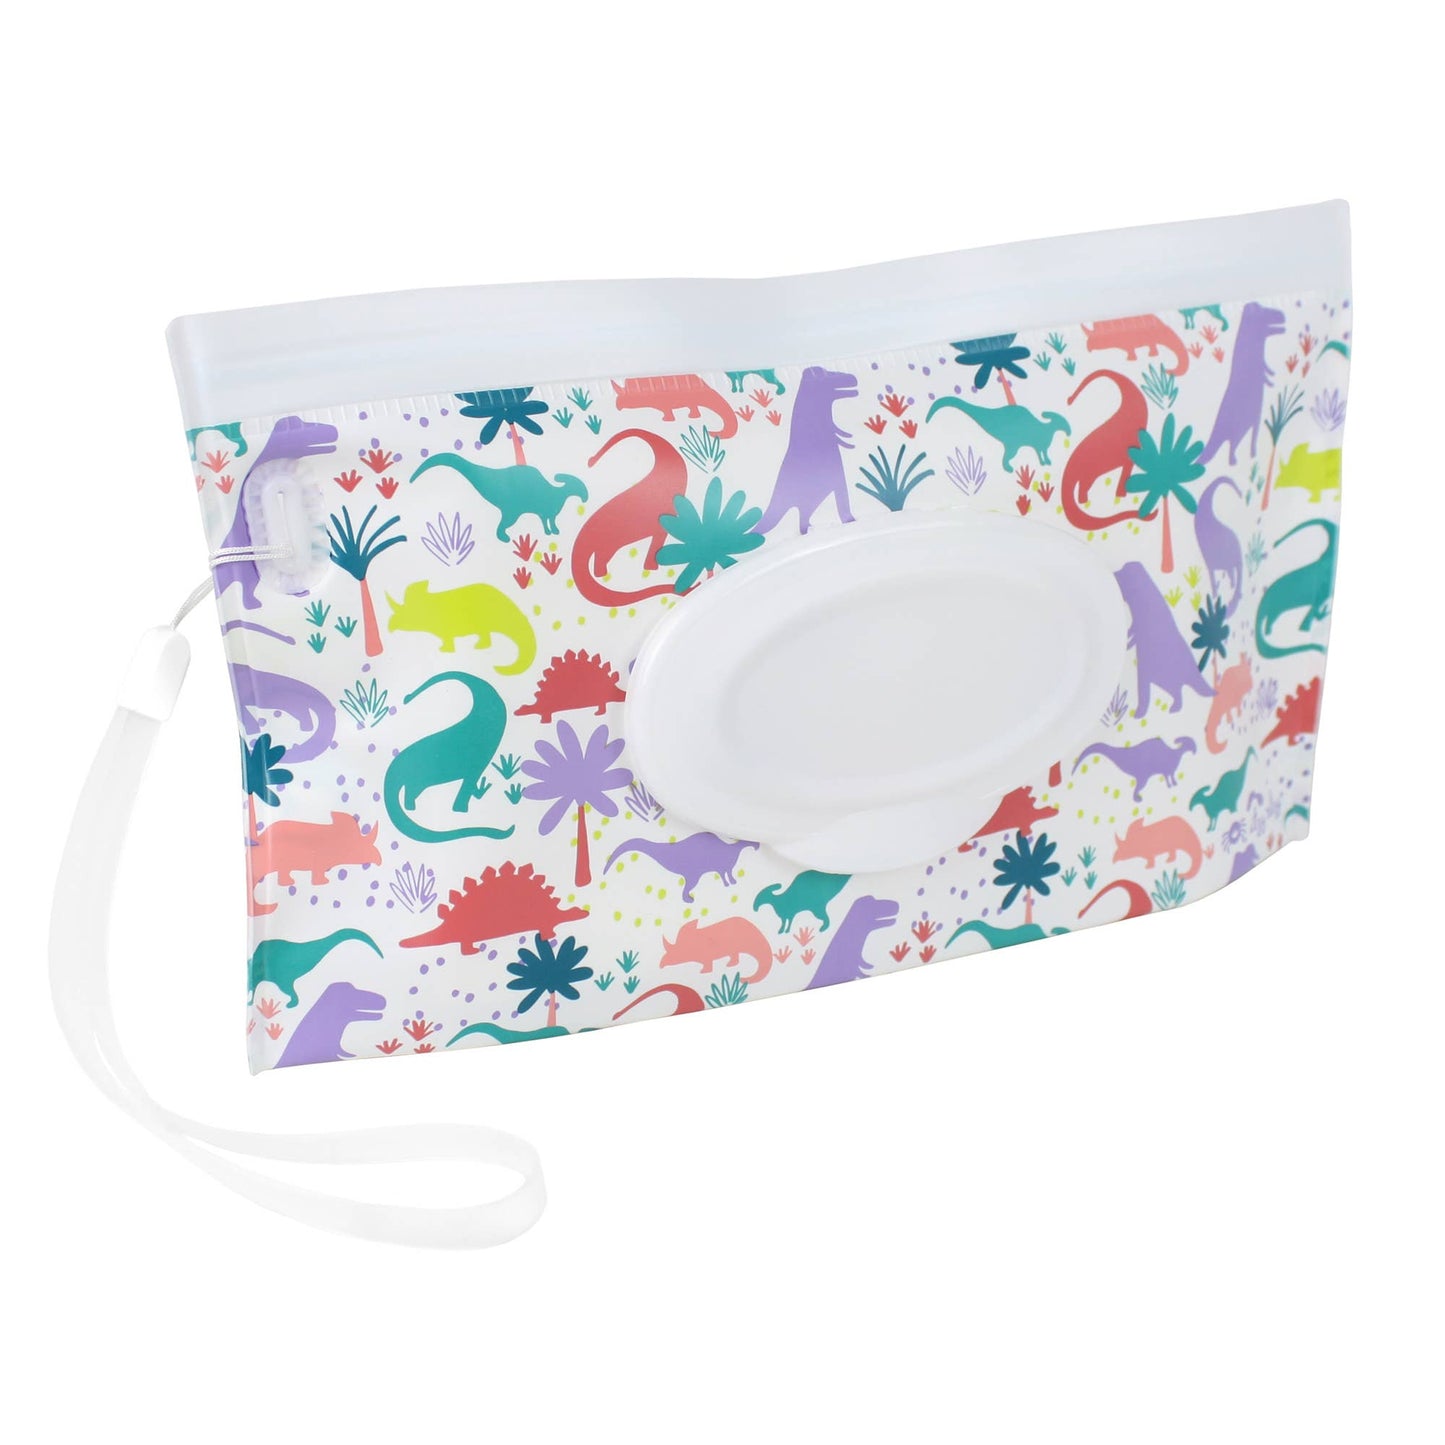 Darling Dinos Take and Travel™ Pouch Reusable Wipes Cases